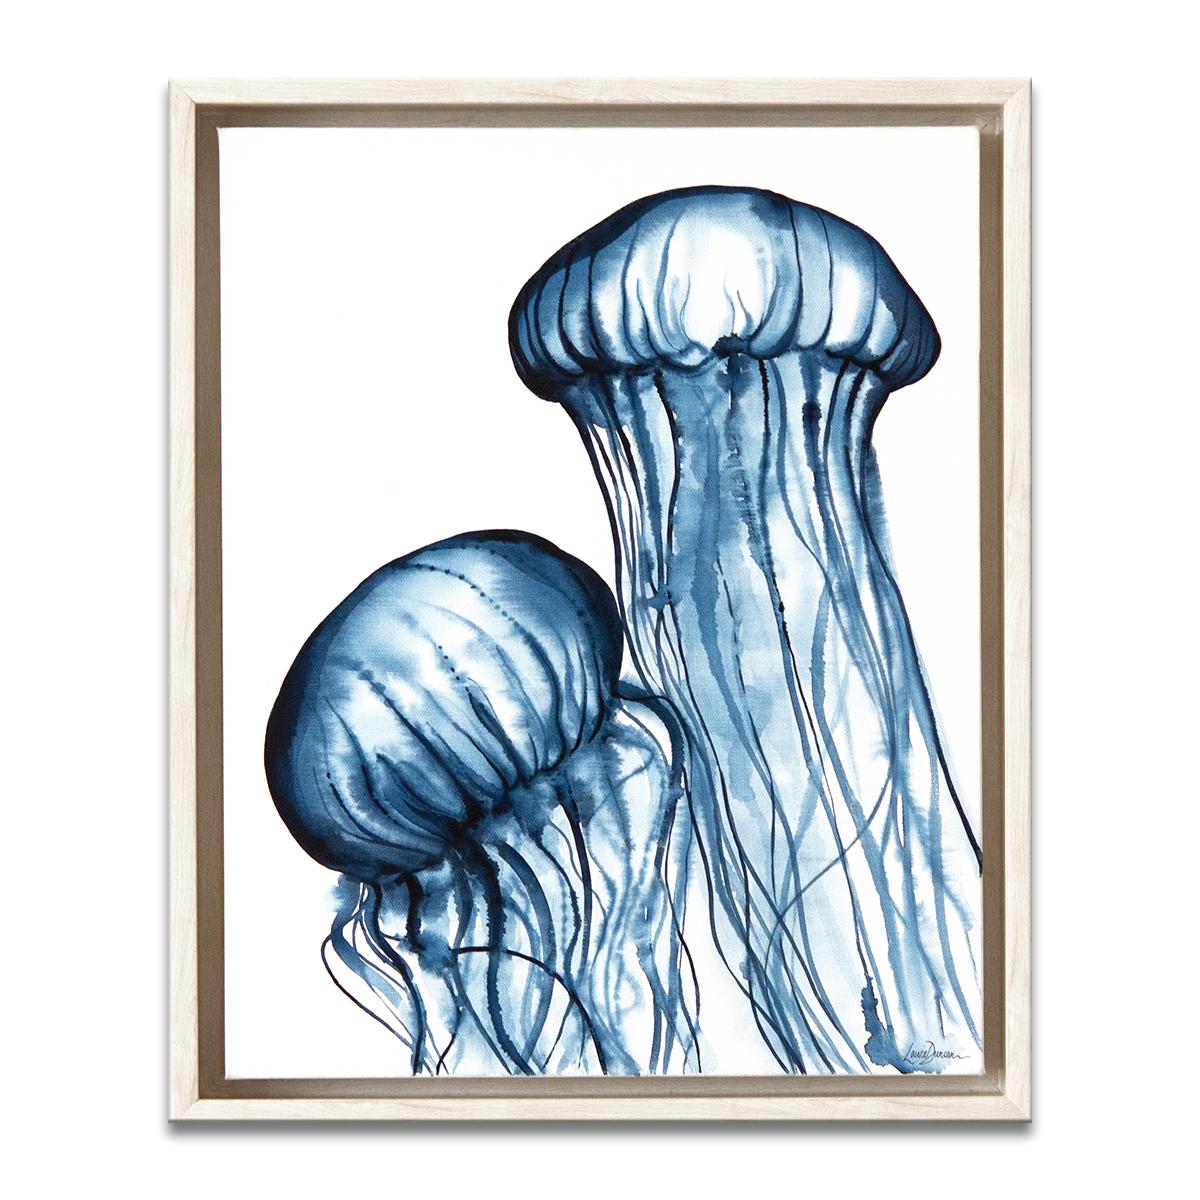 ‘Dancing Jellies' Framed Canvas Original Painting features tropical jelly fish in vibrant tones of blue, and white. The epitome of coastal sophistication, Laurie Duncan’s watercolor masterpieces are so intricately articulated they appear tangible. A